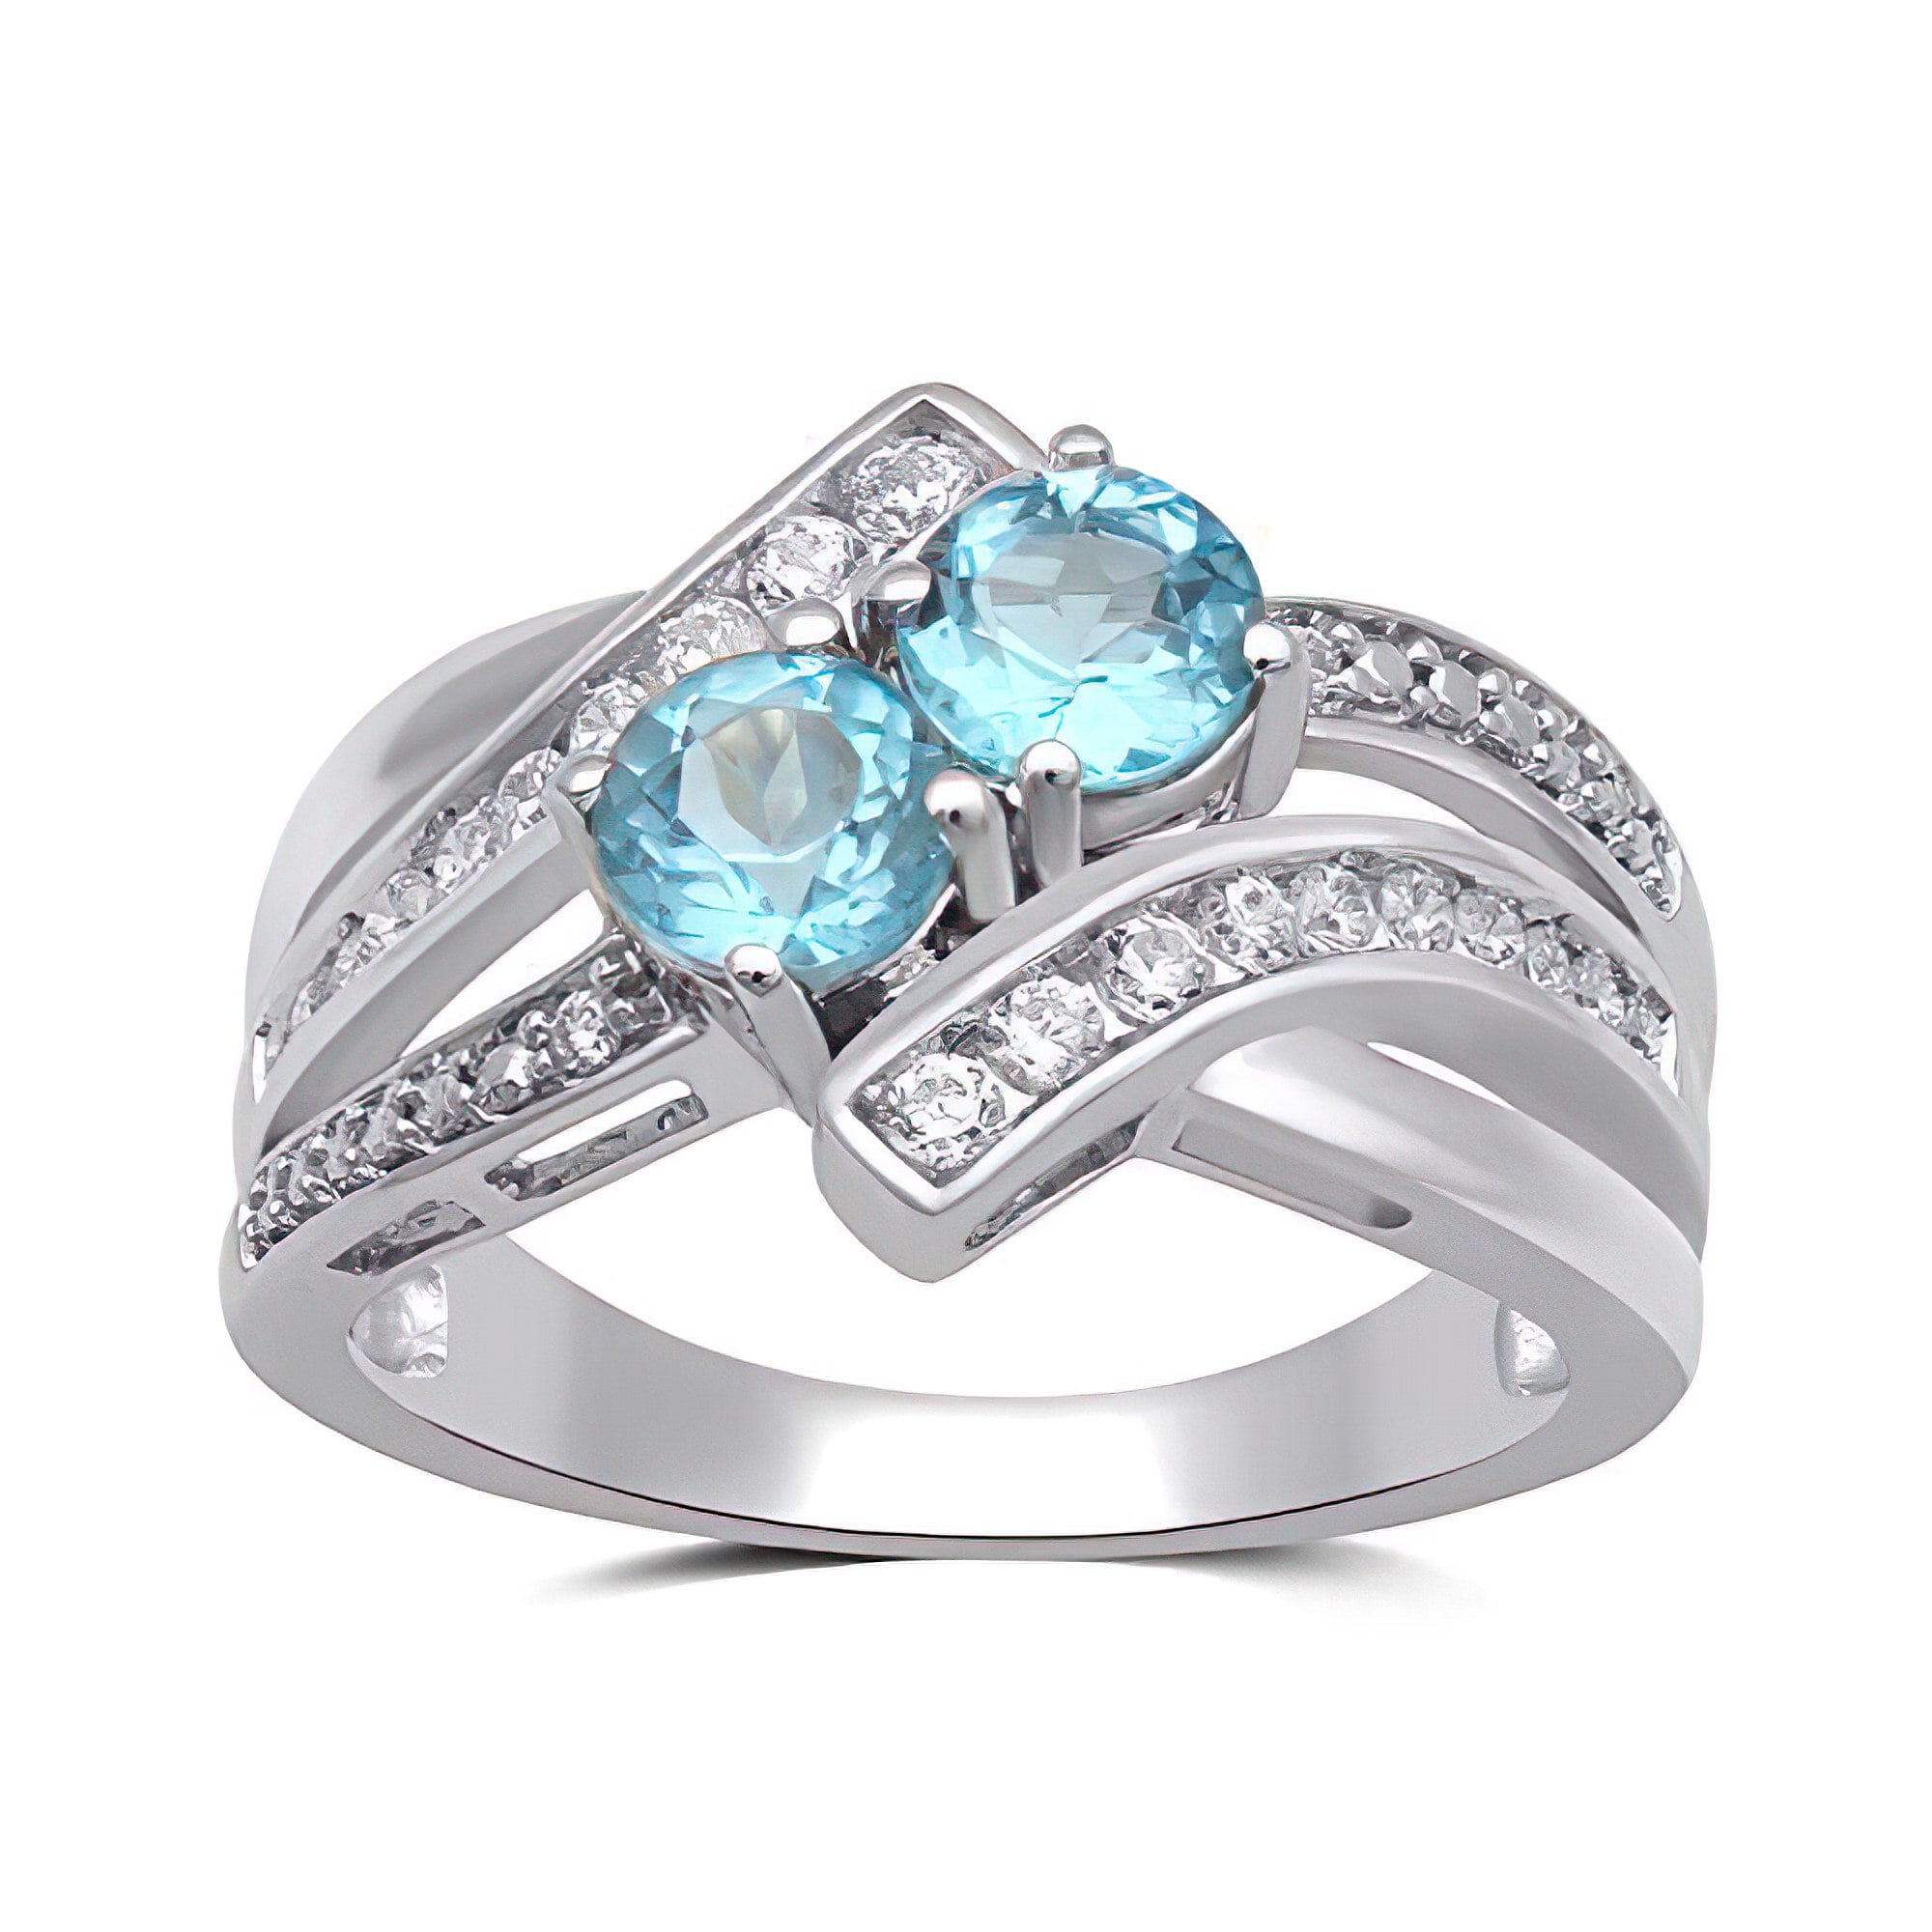 Anniversary Ring November Birthstone Exquisite Swiss Blue Topaz Ring for Her Birthday Gift 925 Sterling Silver Ring